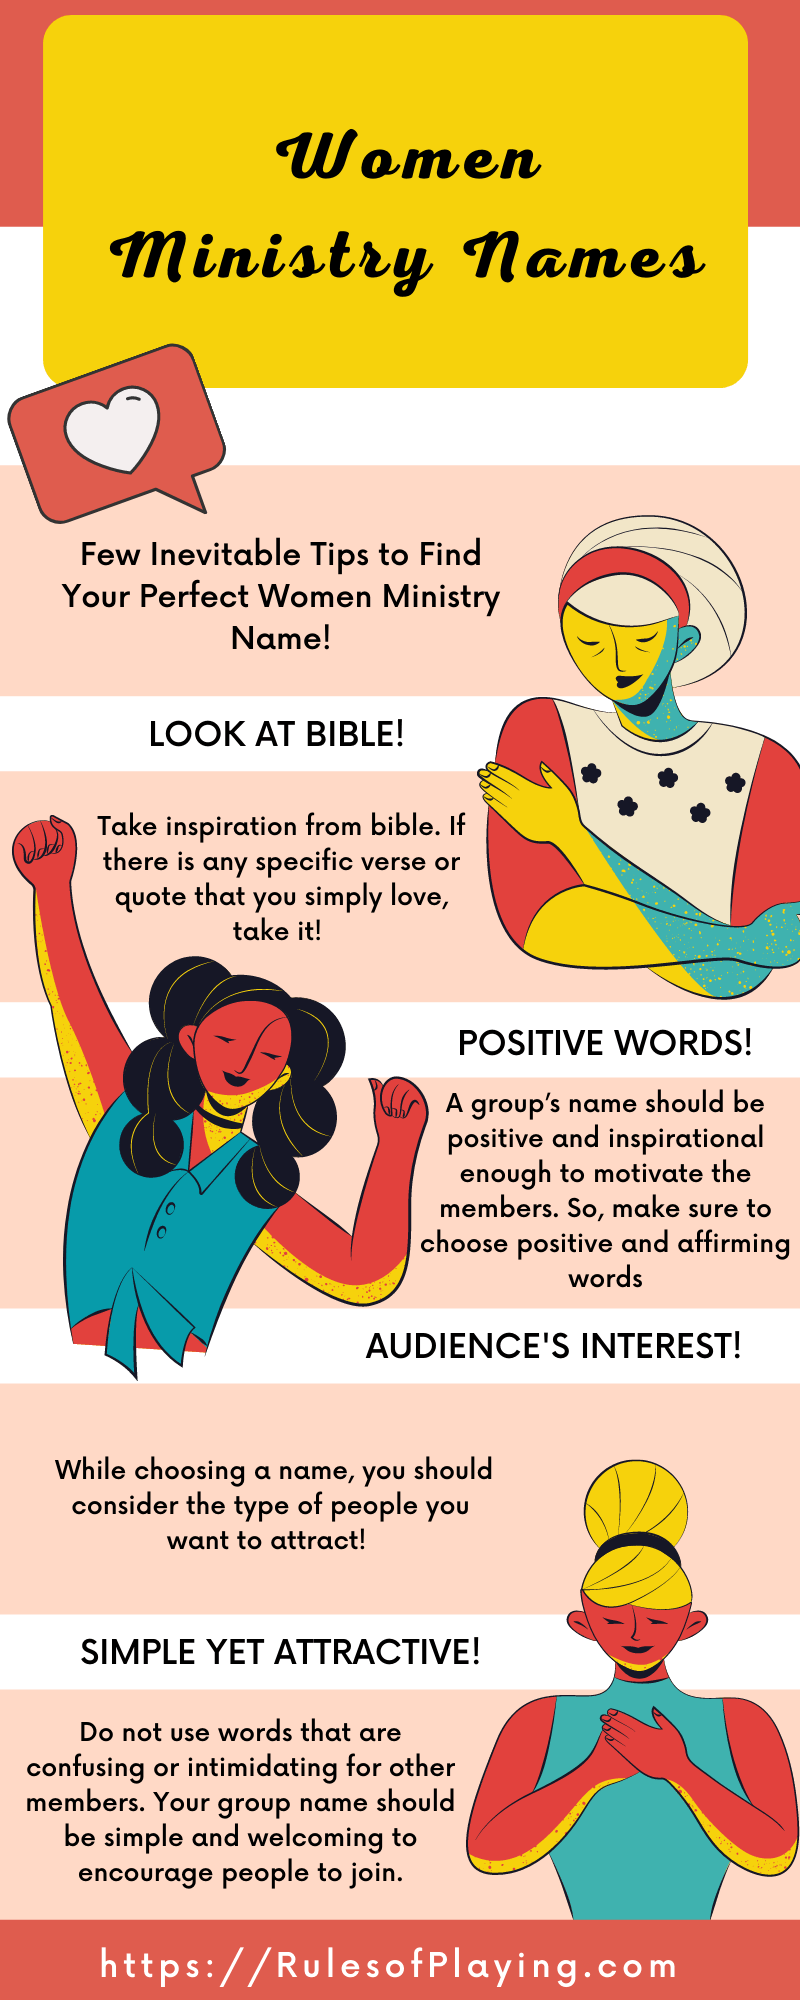 How to Create your own women ministry name?